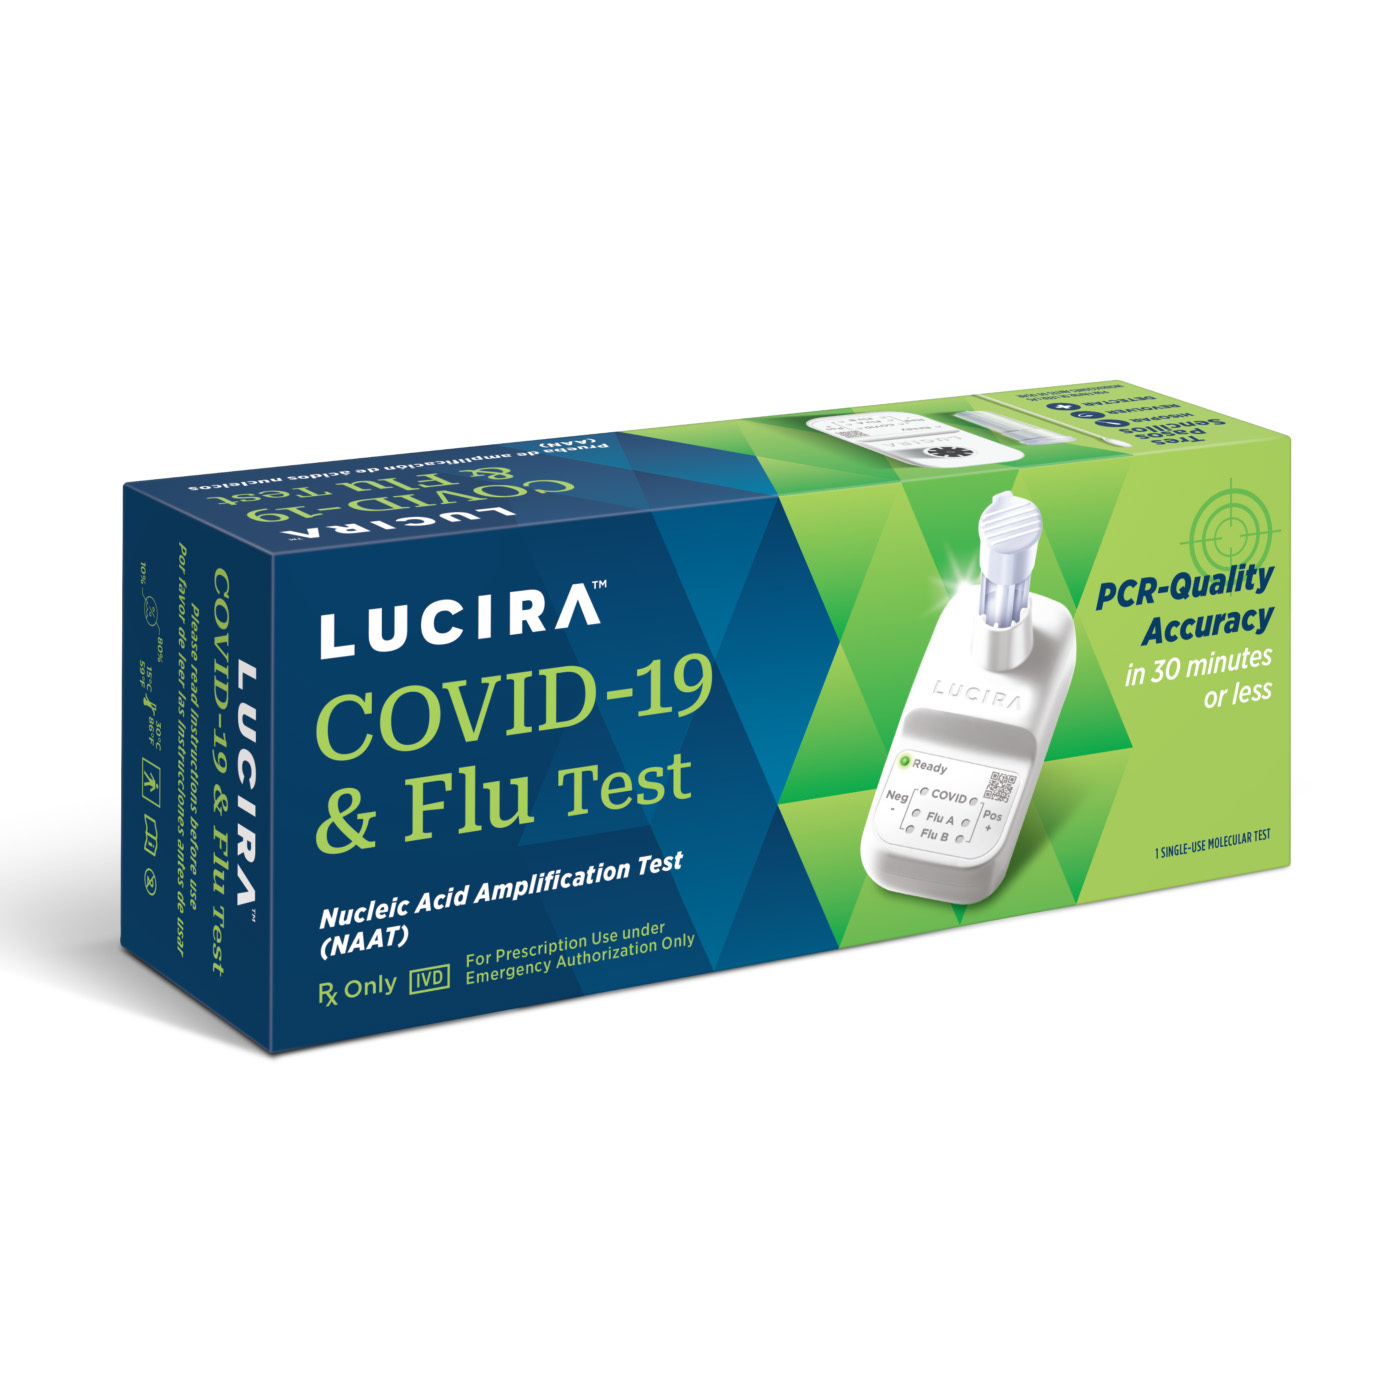 Lucira COVID-19 &amp; Flu Test – the Flexible, Scalable Covid &amp; Flu Test for Point-Of-Care